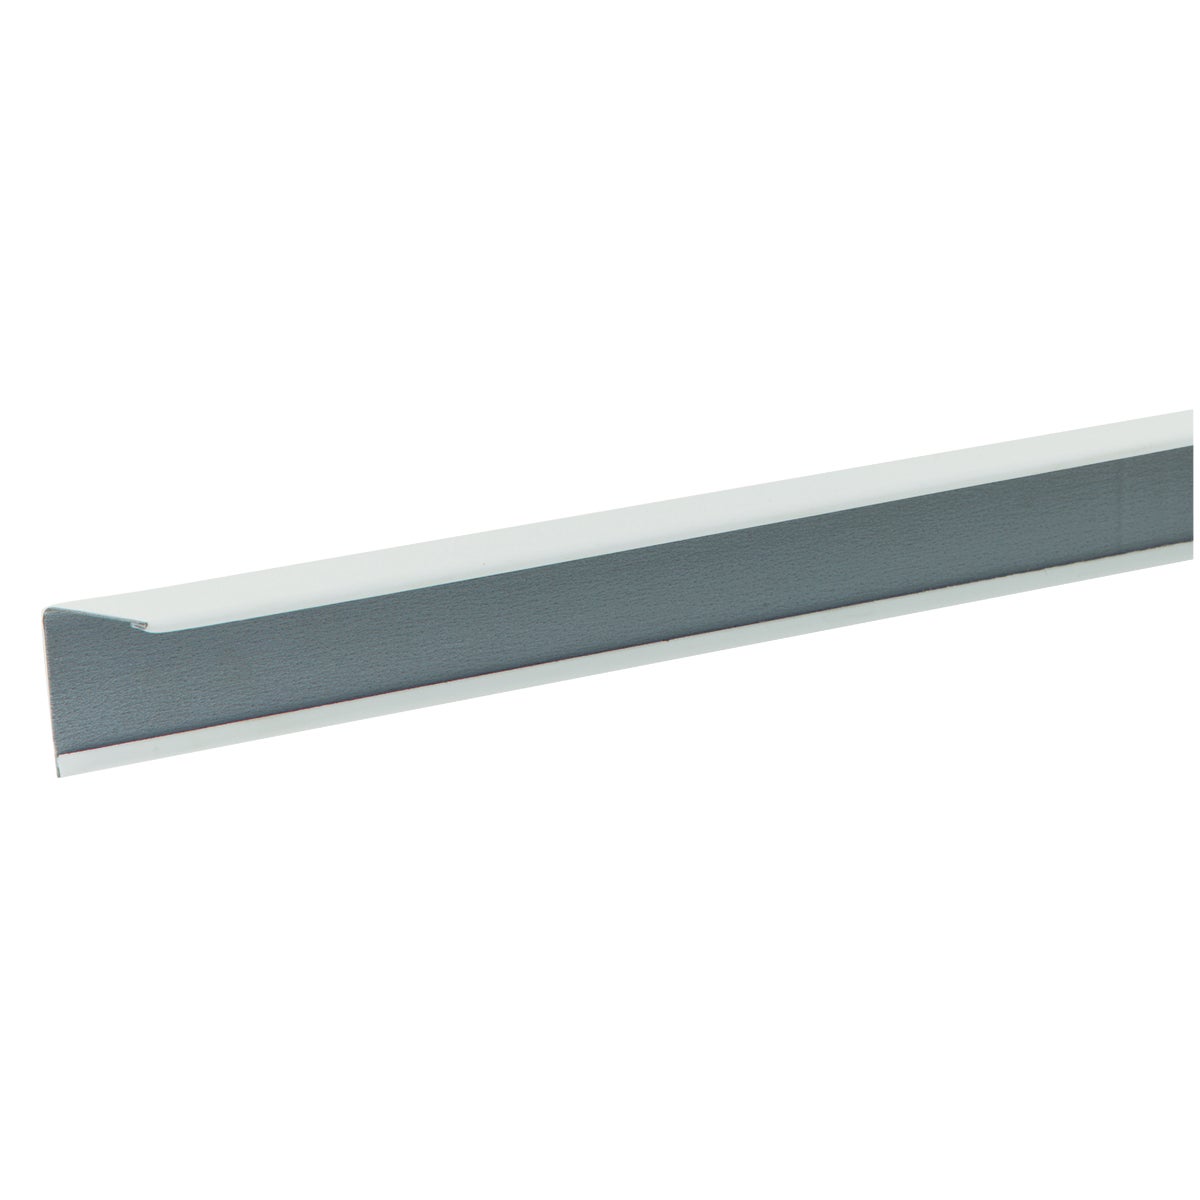 SM7-050 Donn Ceiling Wall Molding angle wall